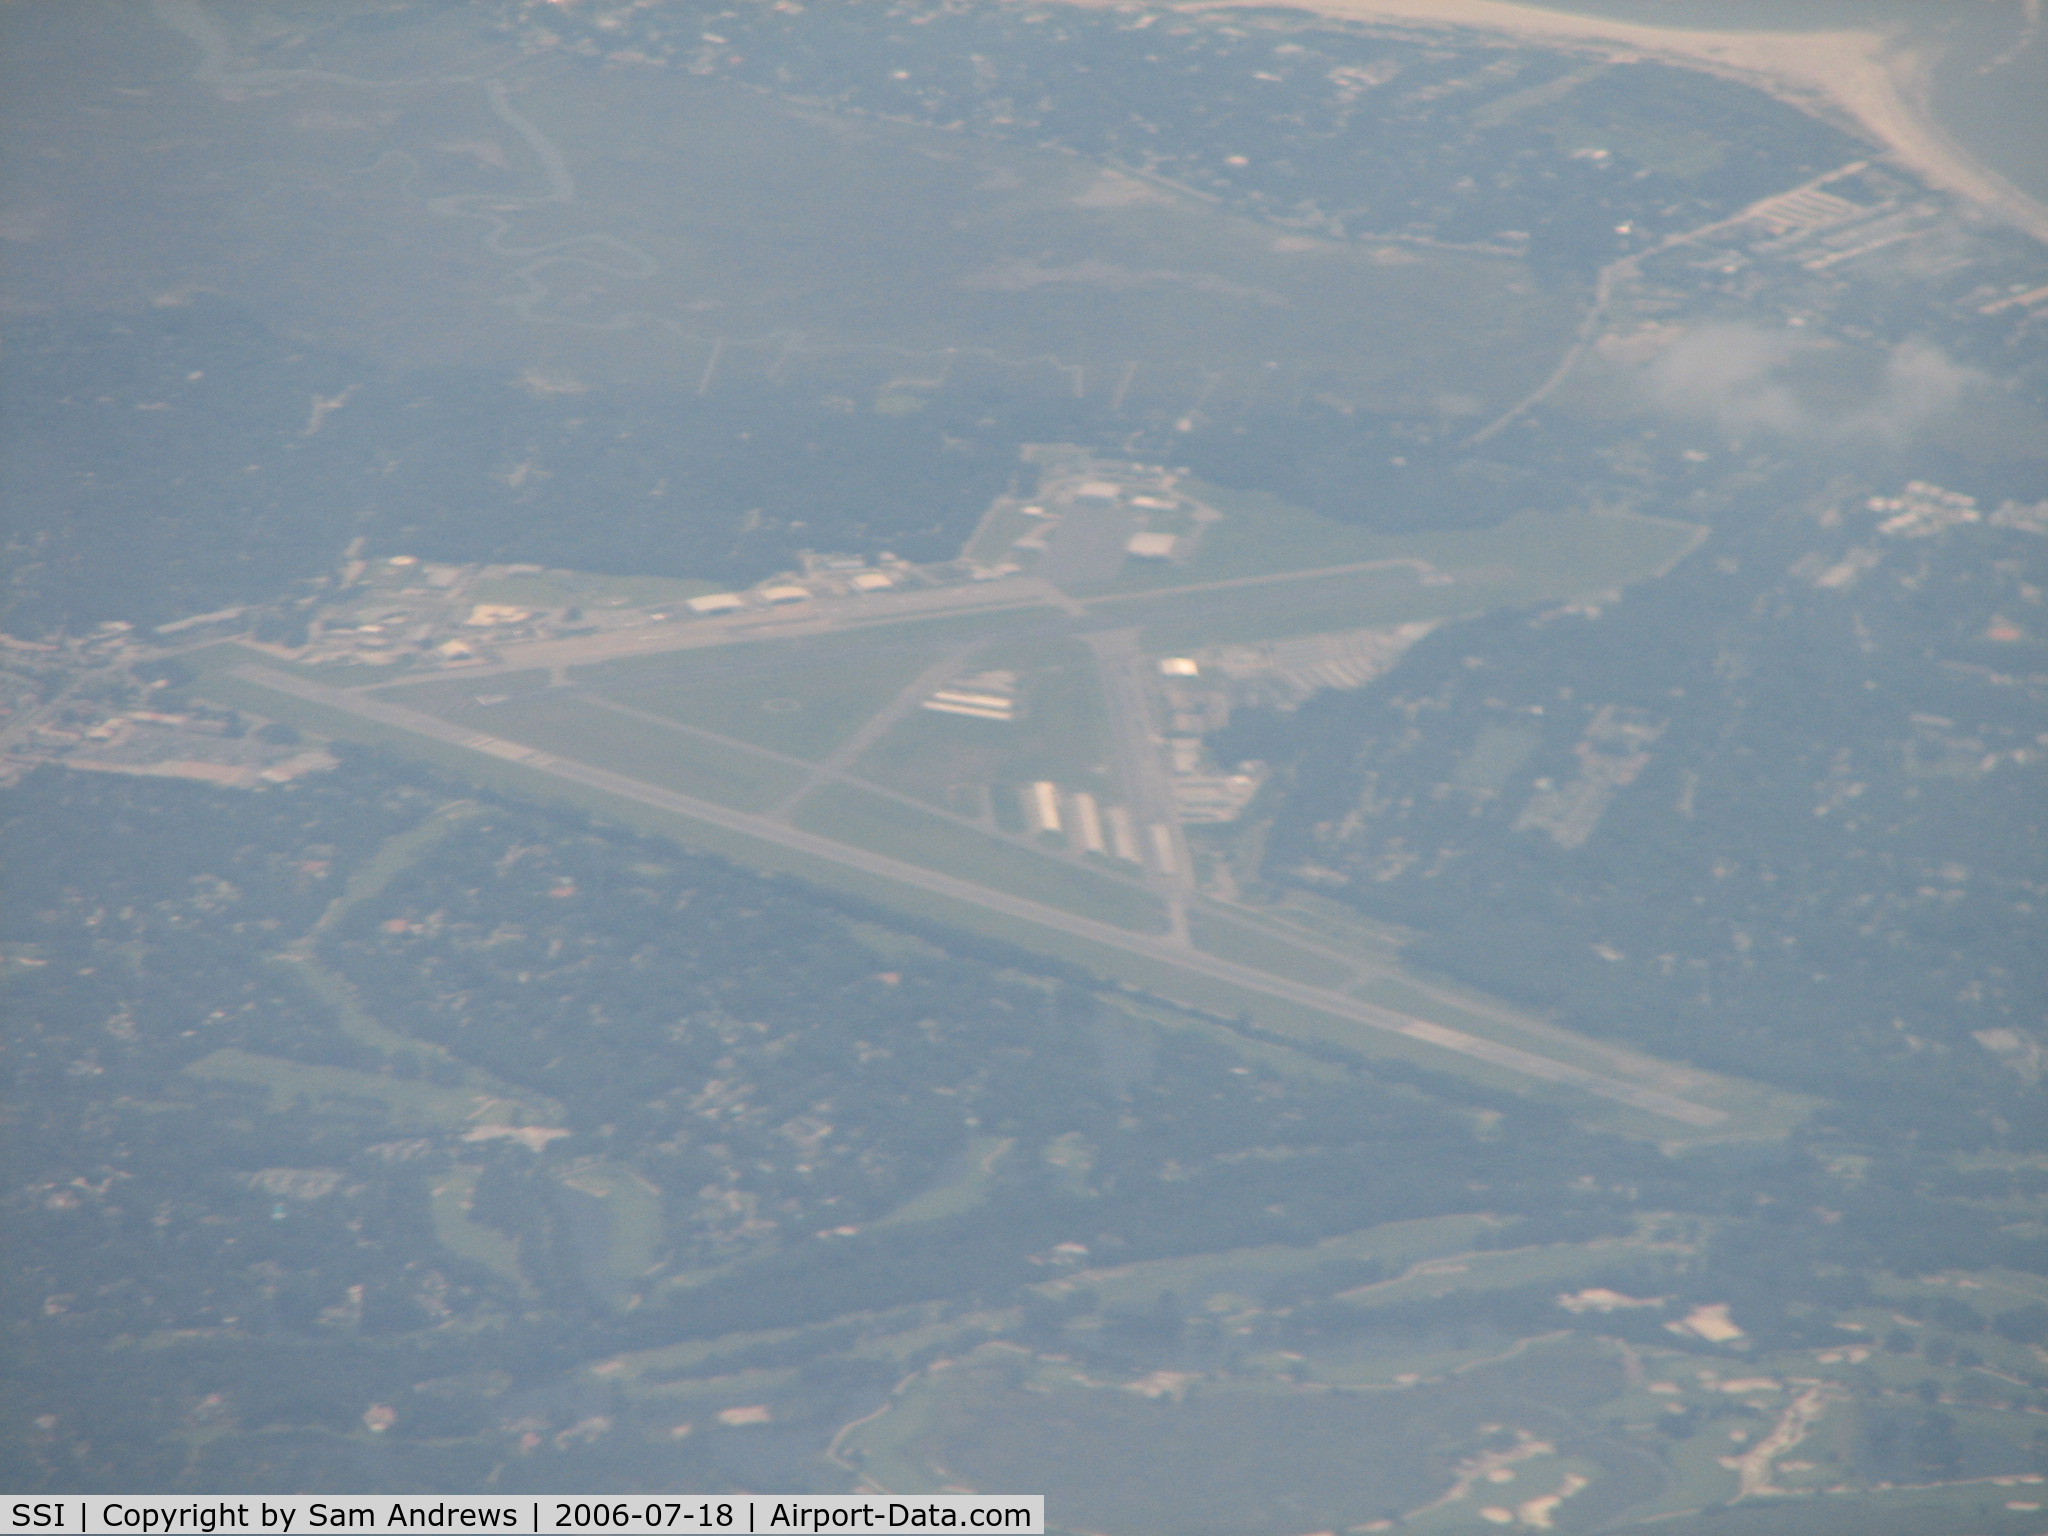 Malcolm Mc Kinnon Airport (SSI) - Climbing to 40K on my way to BWI from JAX.